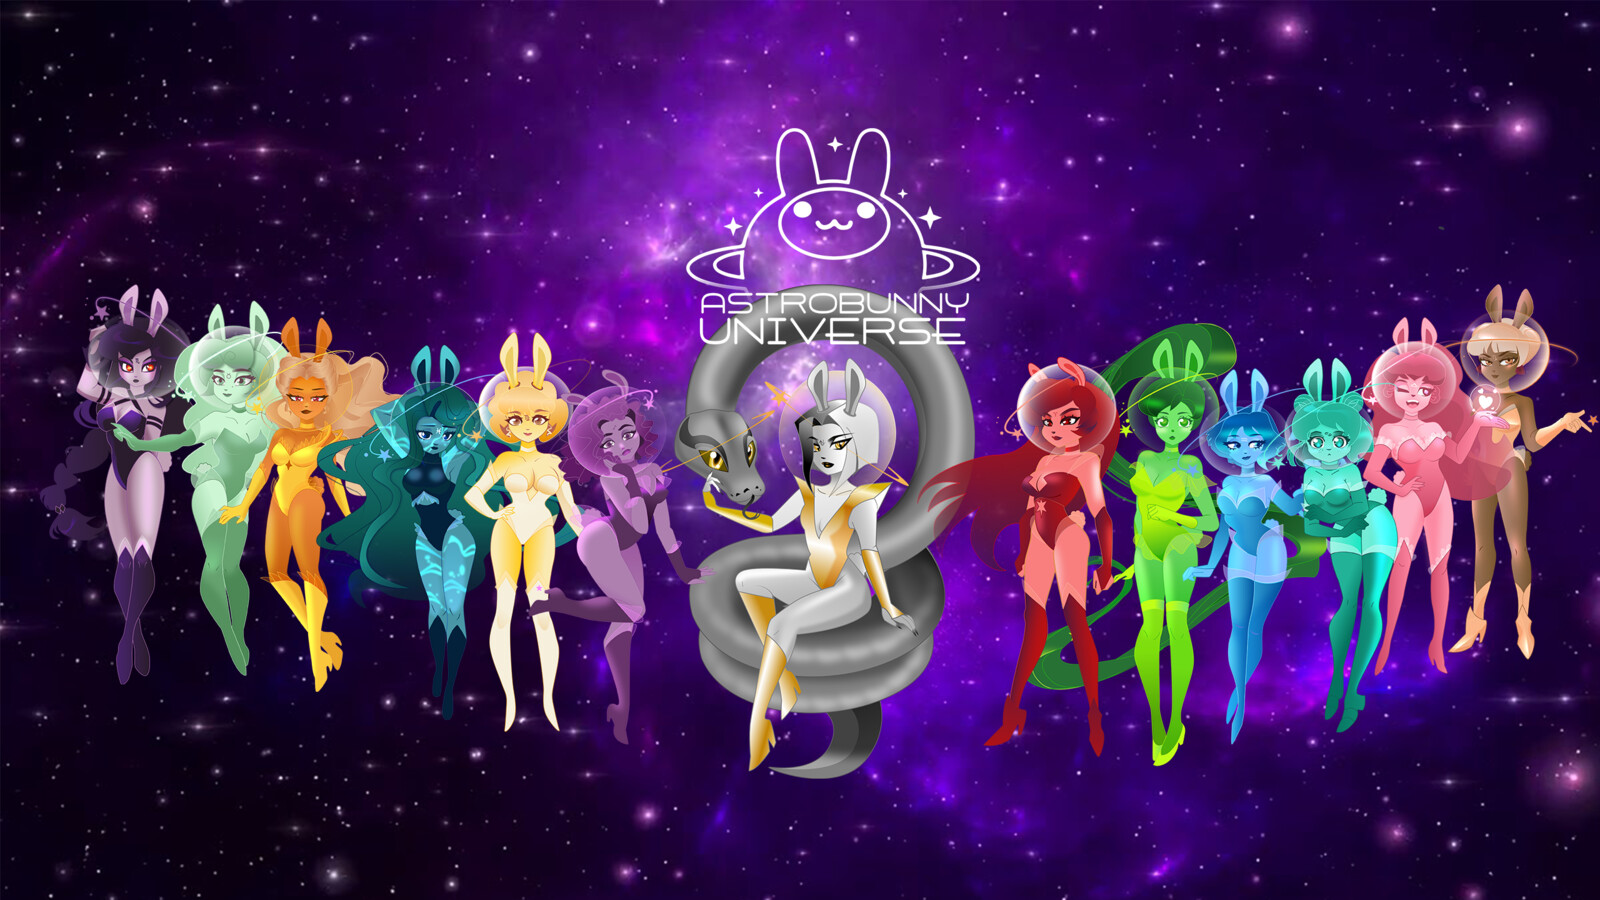 Astrobunny Universe Character design